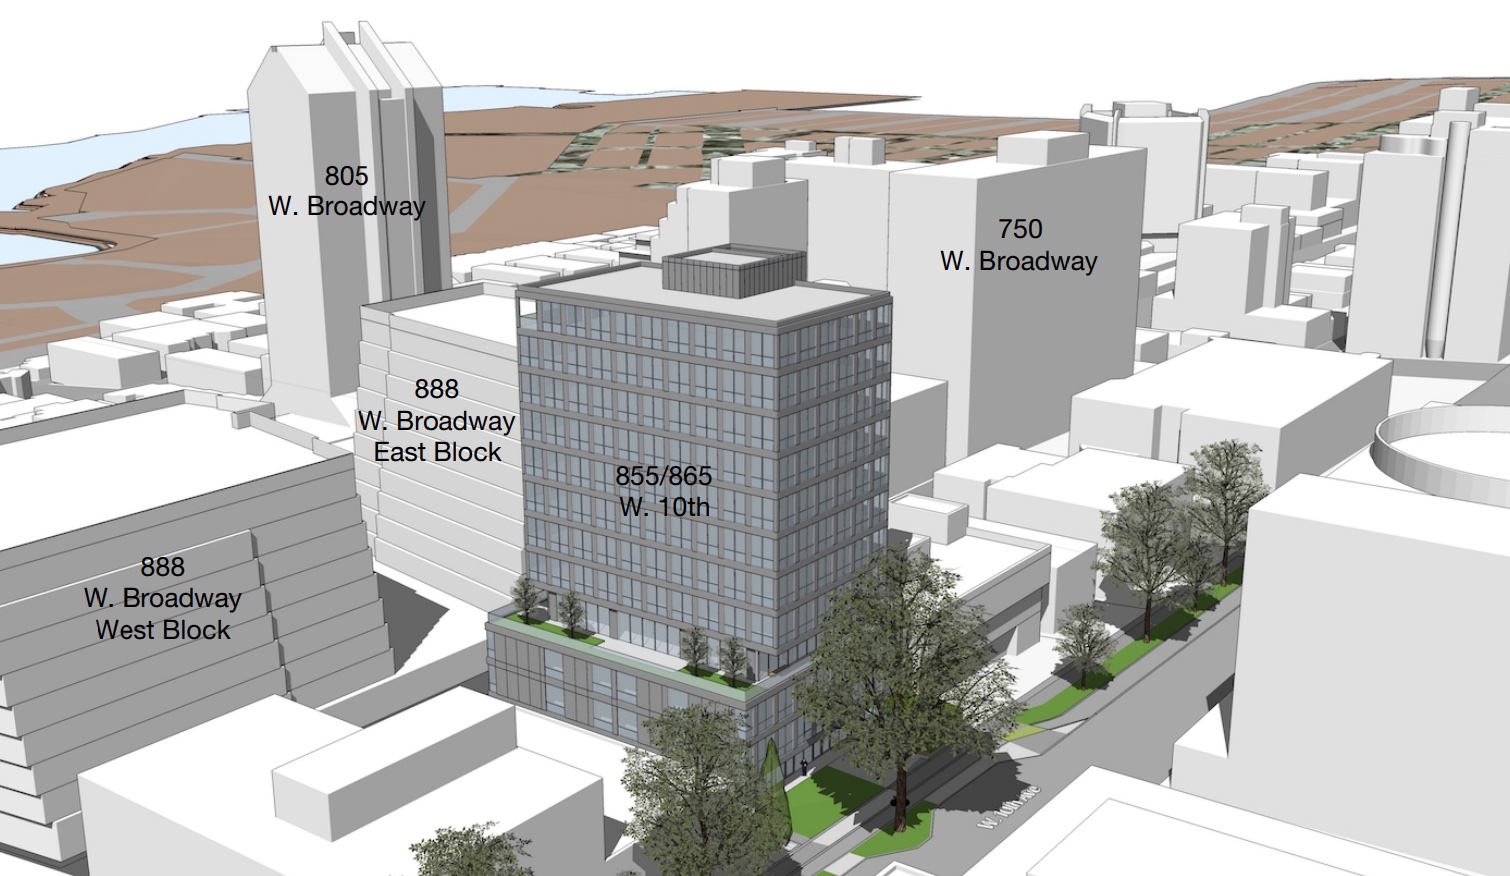 VGH office tower - West 10th Avenue - amenity space